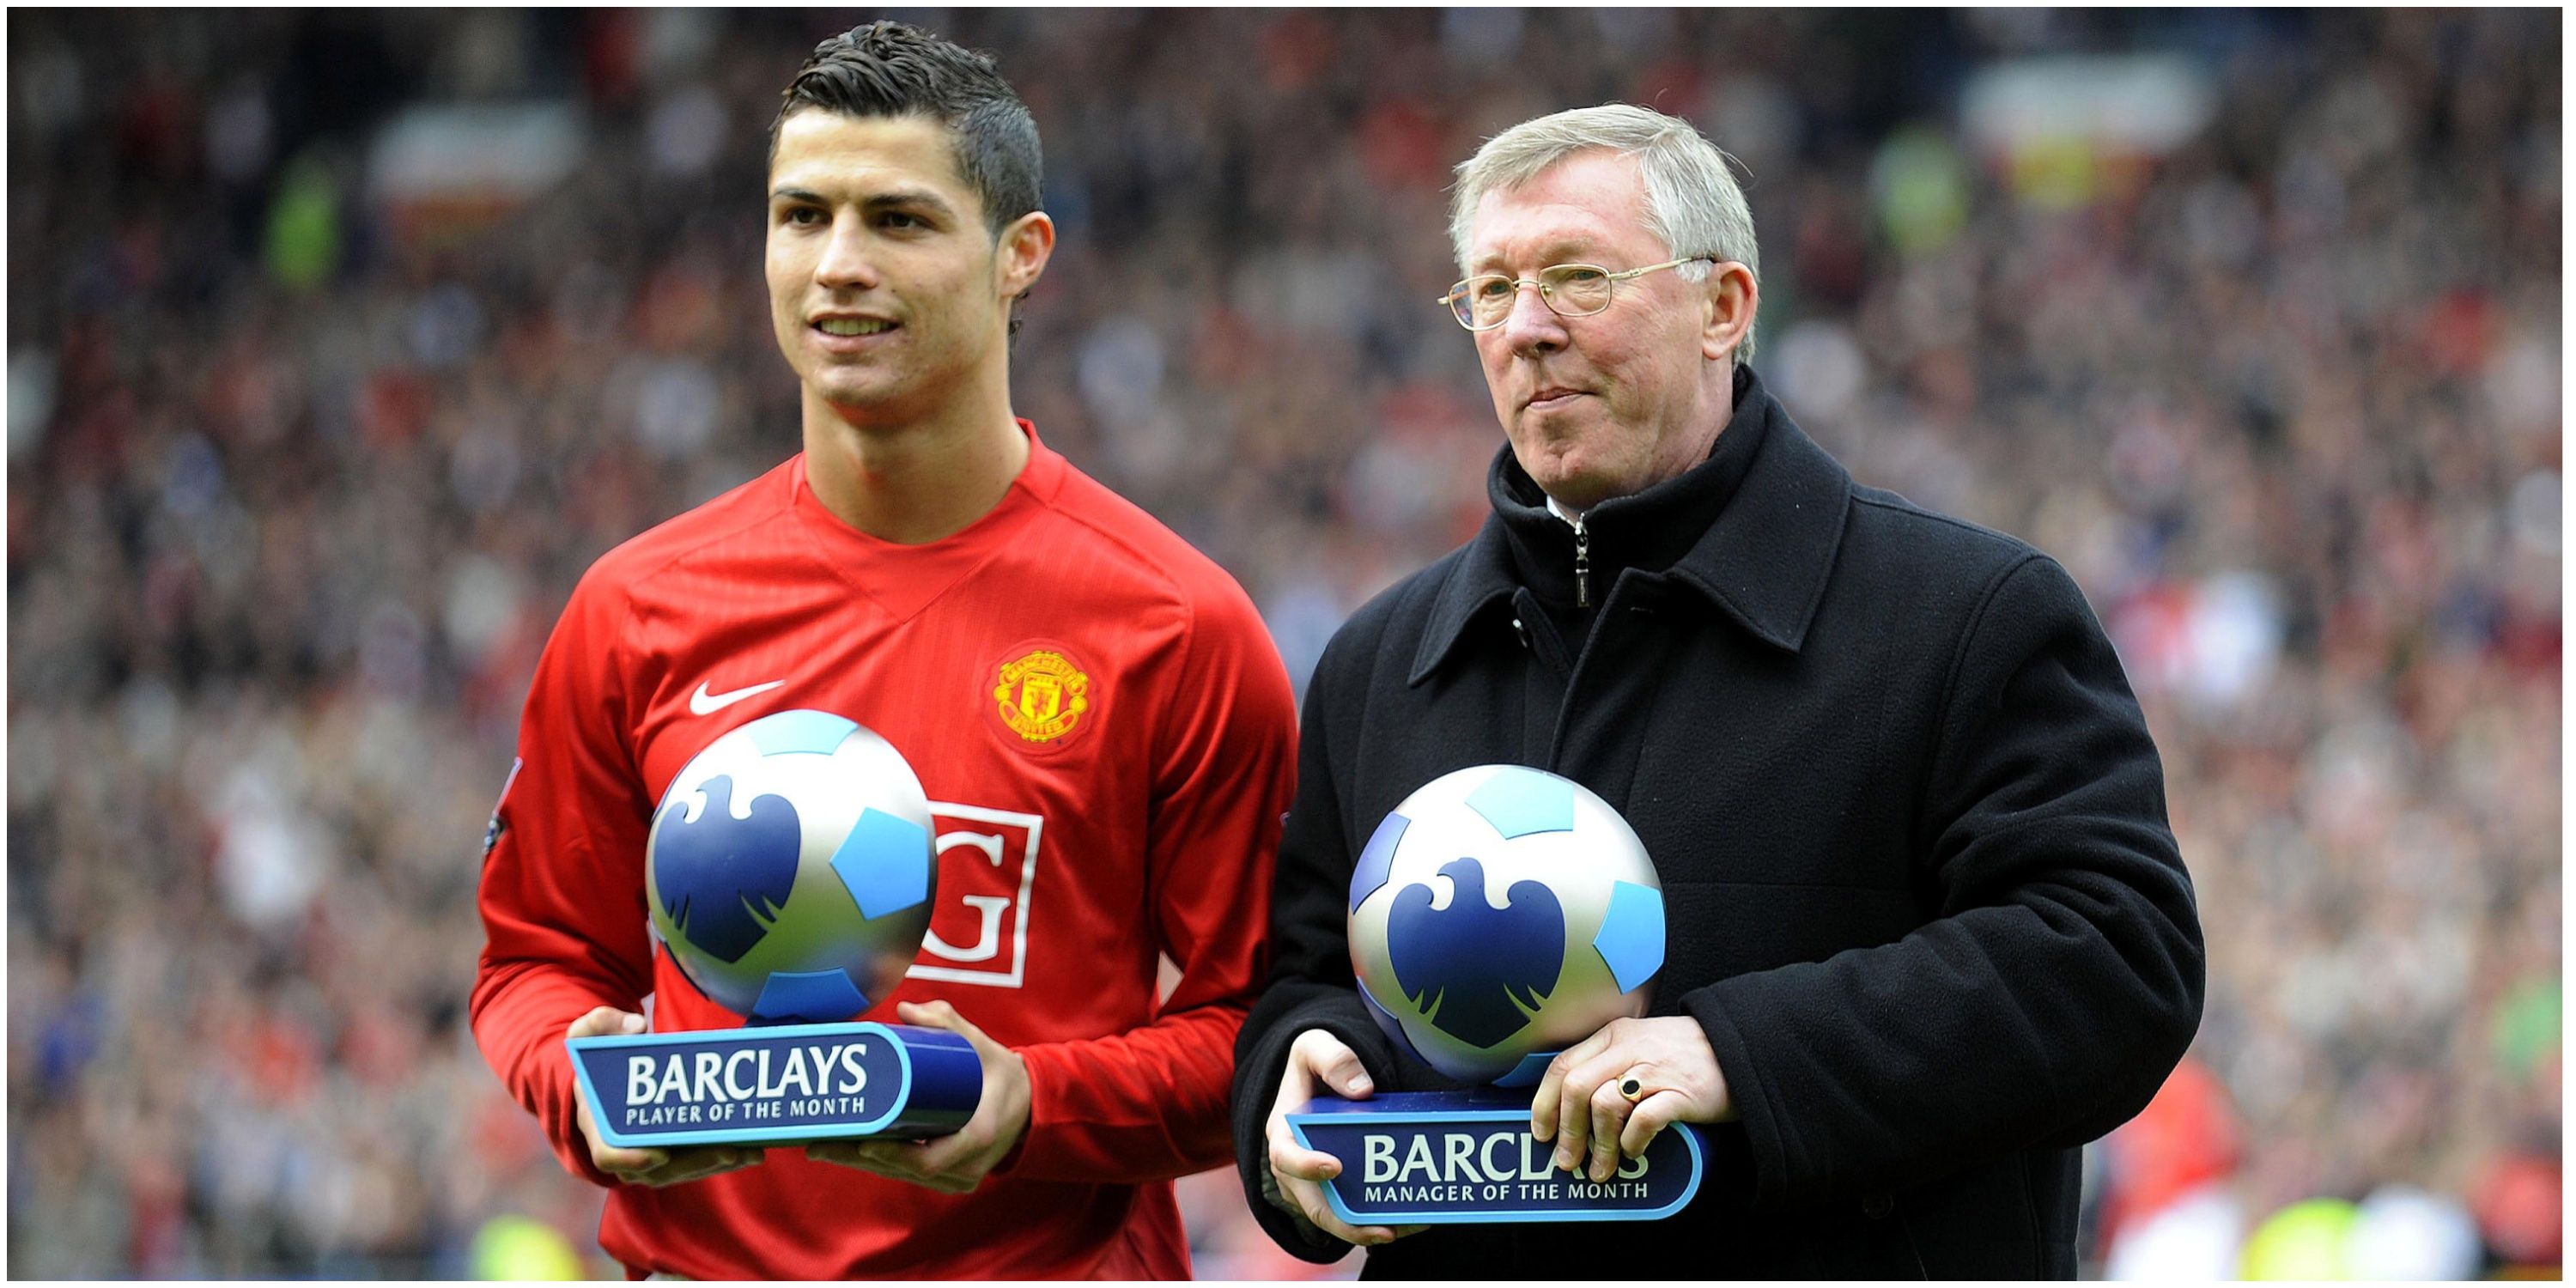 Sir Alex Ferguson with Manager of the Month award